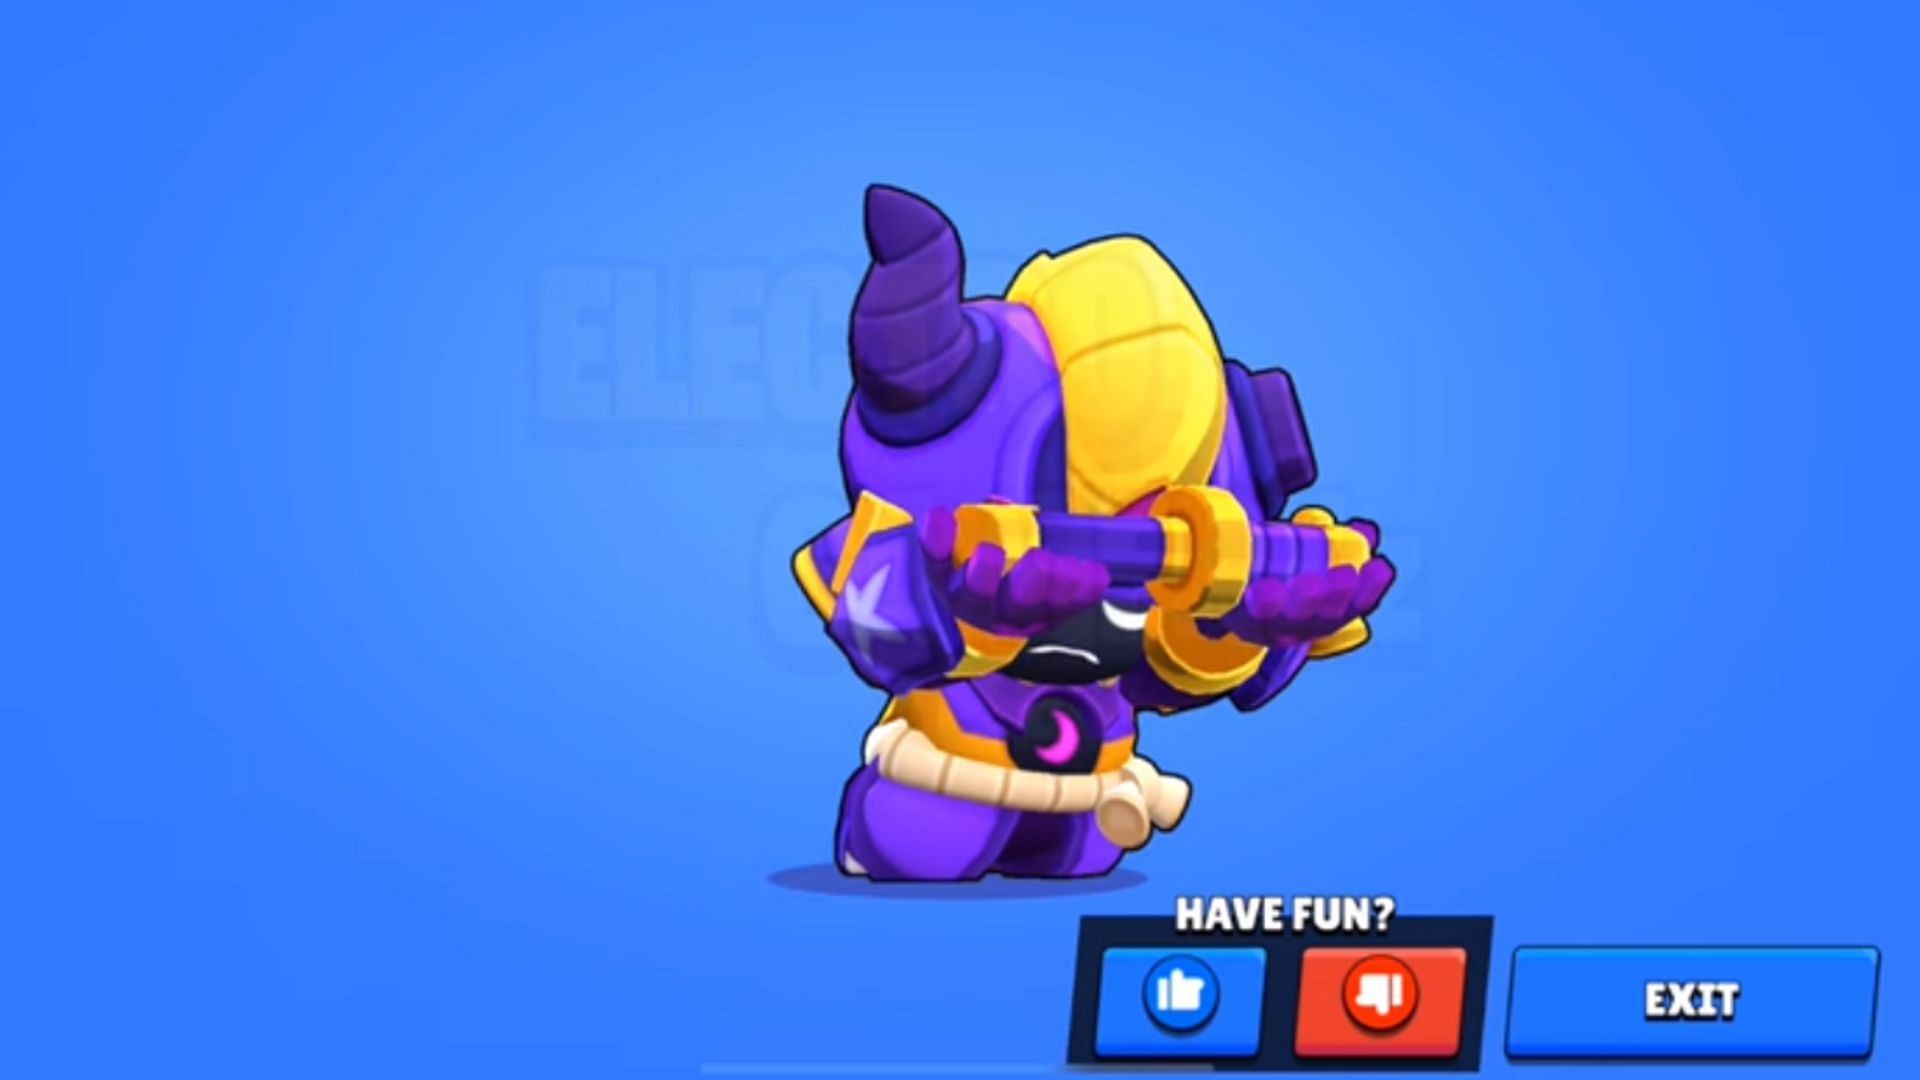 Losing animation (Image via Supercell)